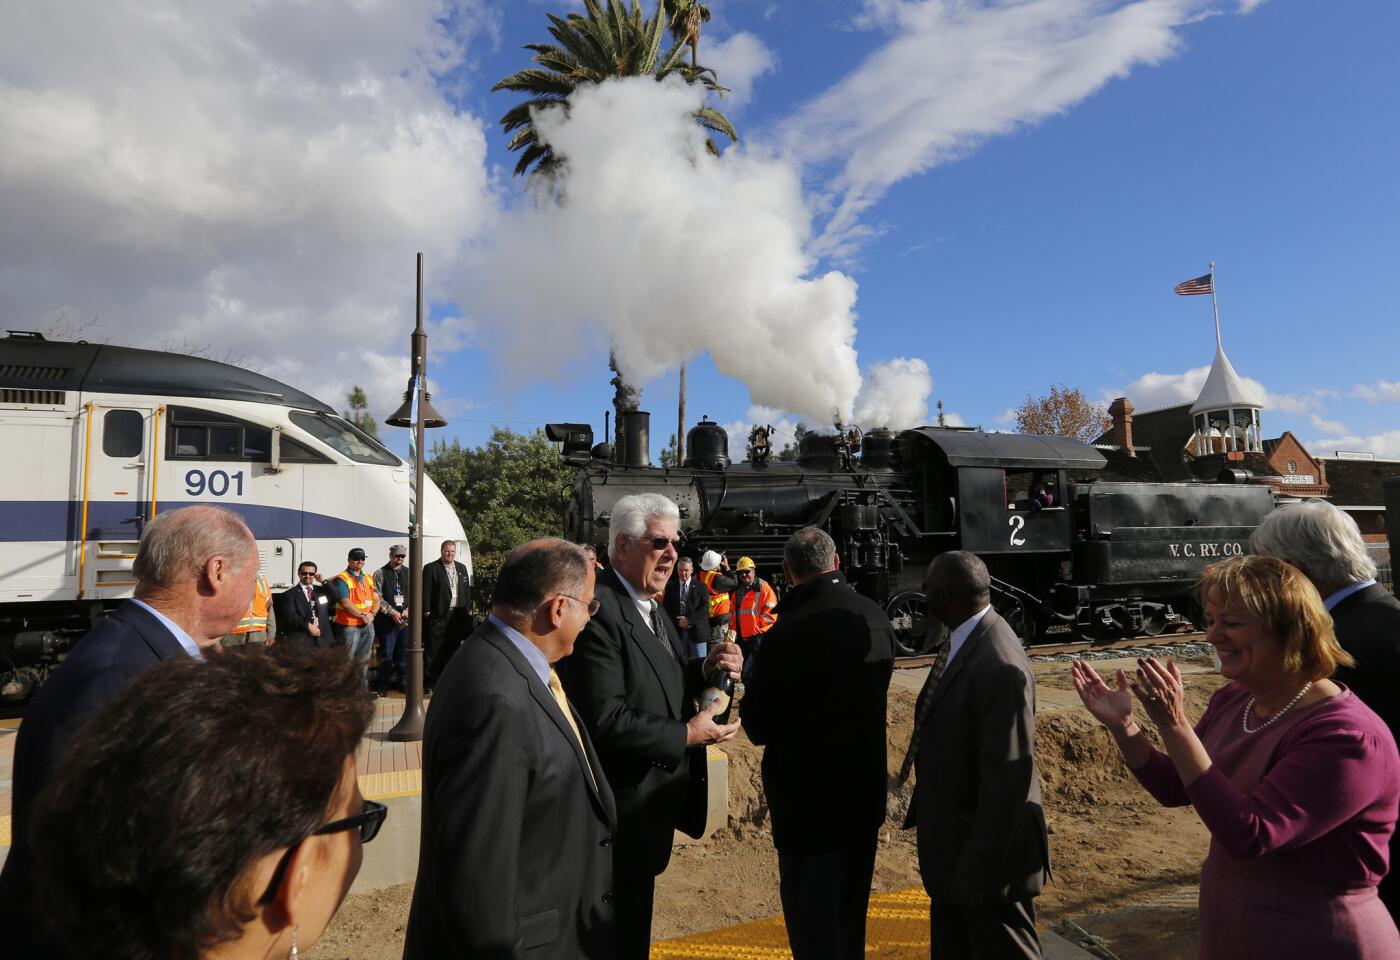 Local and federal officials cheer as a 1922 steam locomotive from the Orange Empire Railway Museum blows its horn during the dedication ceremony of the new Perris route set to open early next year.